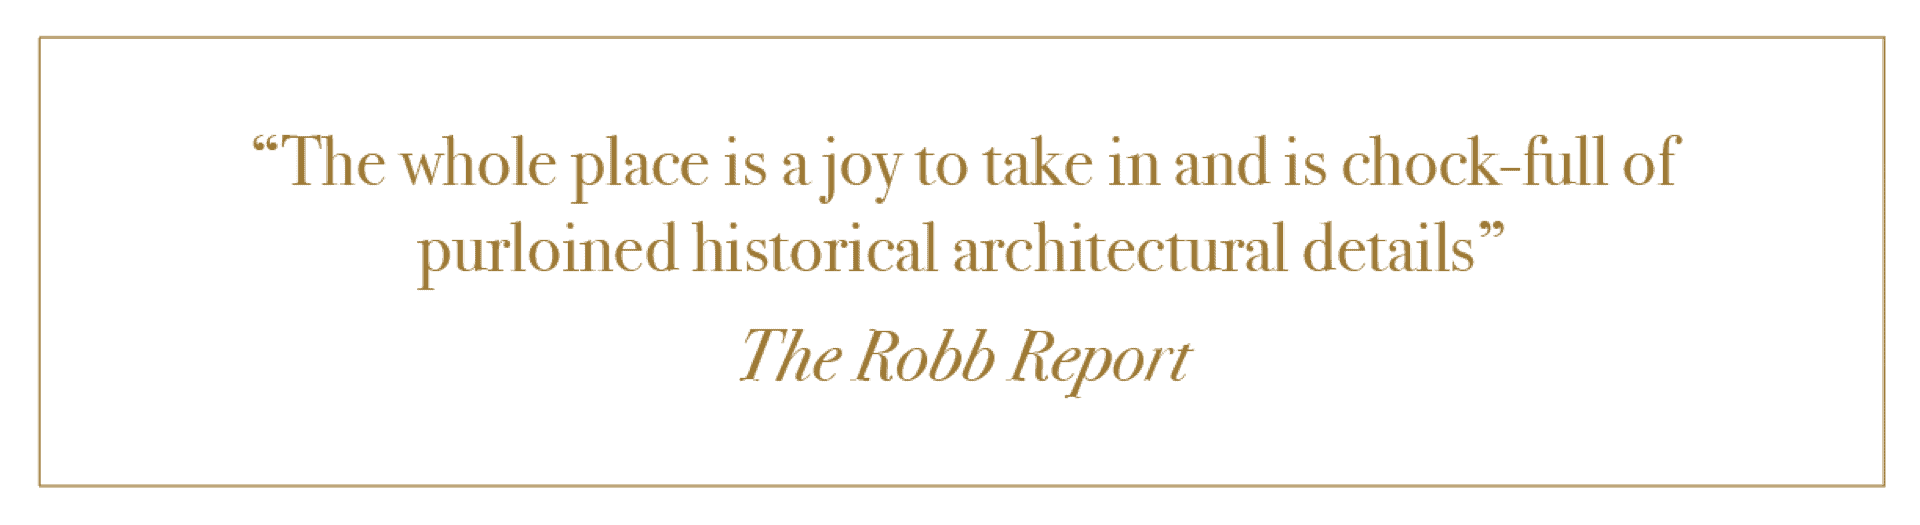 A Review from The Robb Report